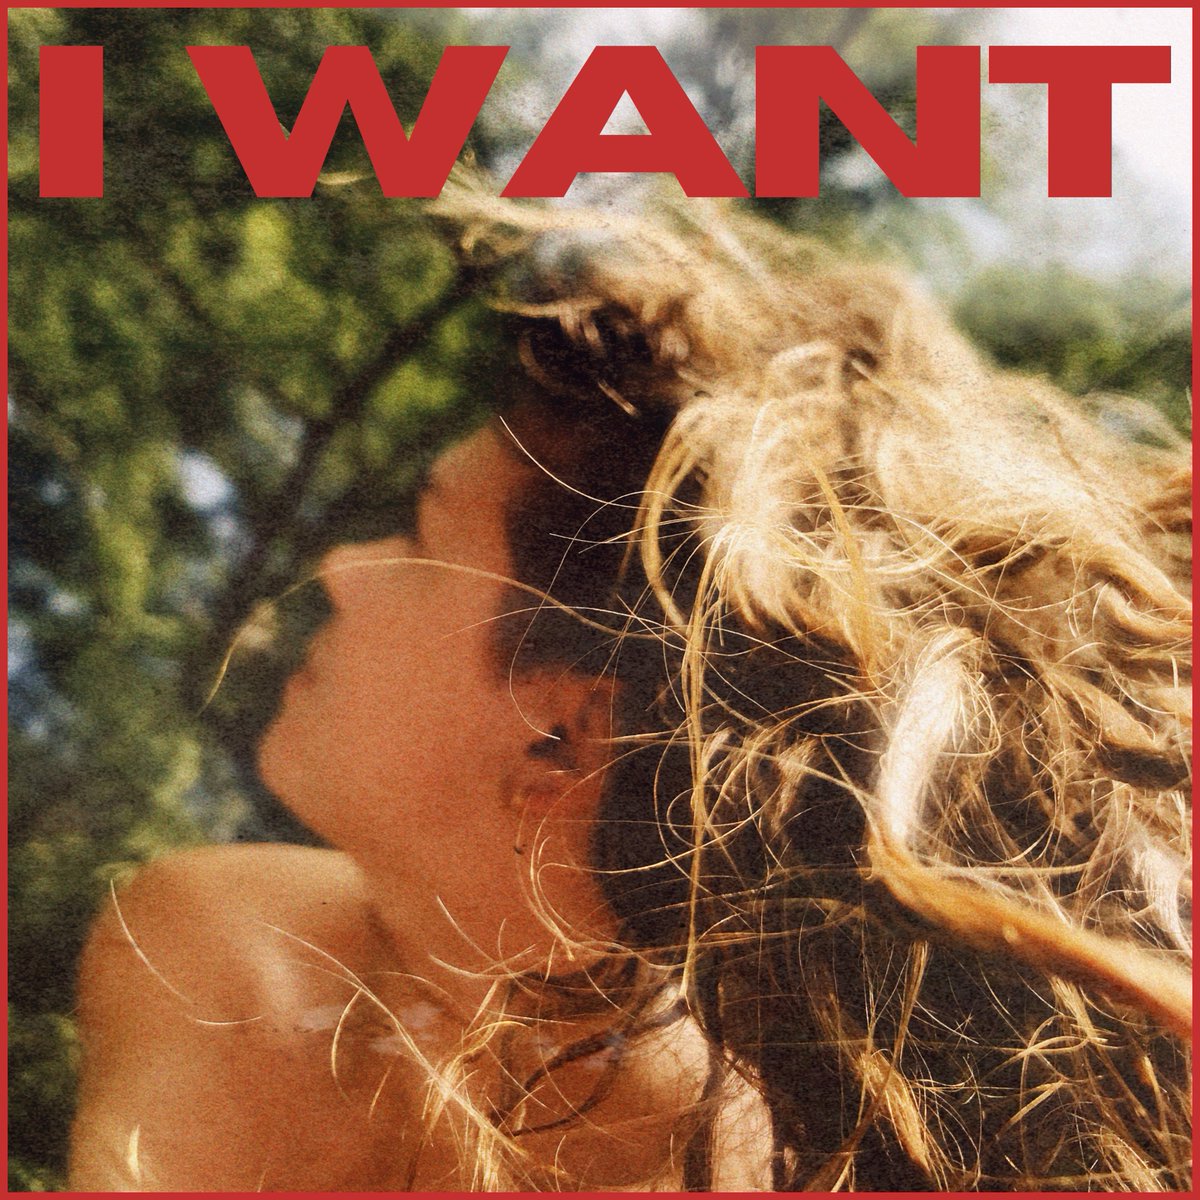 i've got a new single out today called 'i want' - it's about desire, pleasure, 💦it's an end of summer squeeze and i've loved writing and making it without overthinking too much. enjoy x tr.ee/iwant